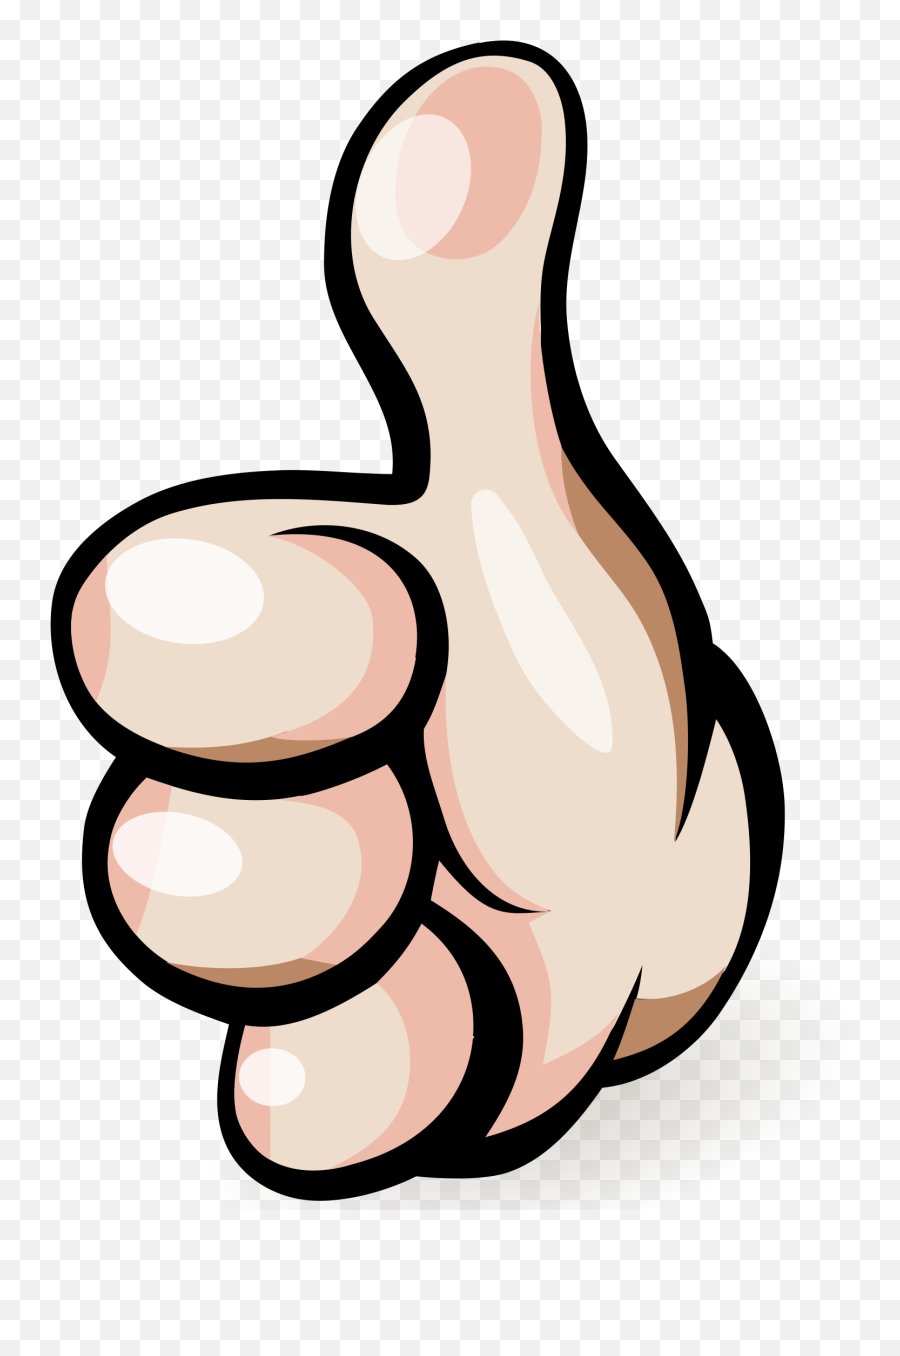 Positive Clipart Thumbs Down Picture - Png Thumbs Up Cartoon Emoji,Thumbs Down Clipart